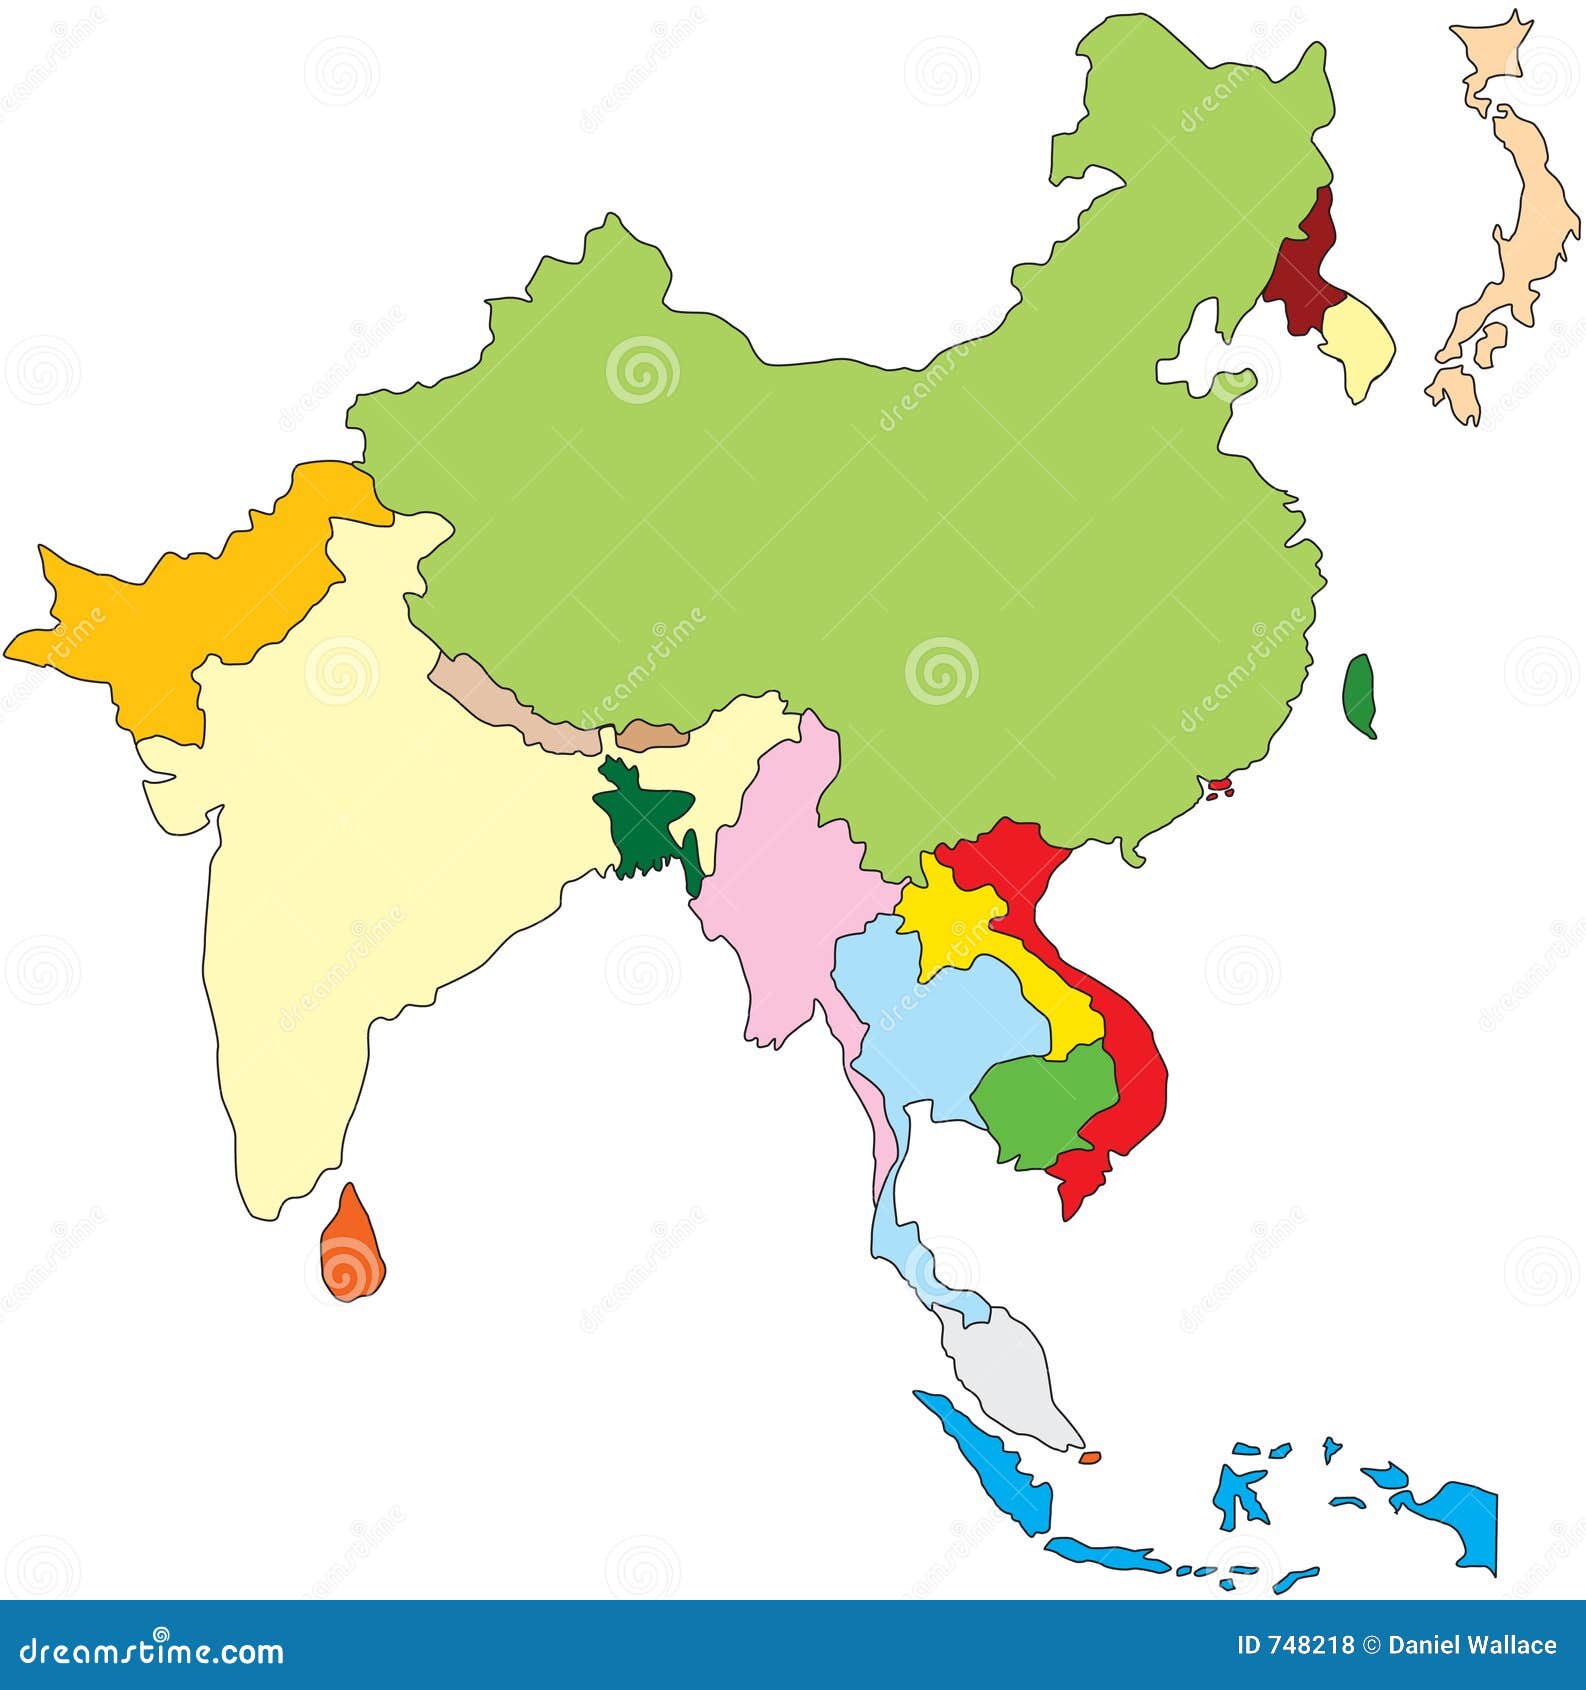 clipart asia map - photo #27